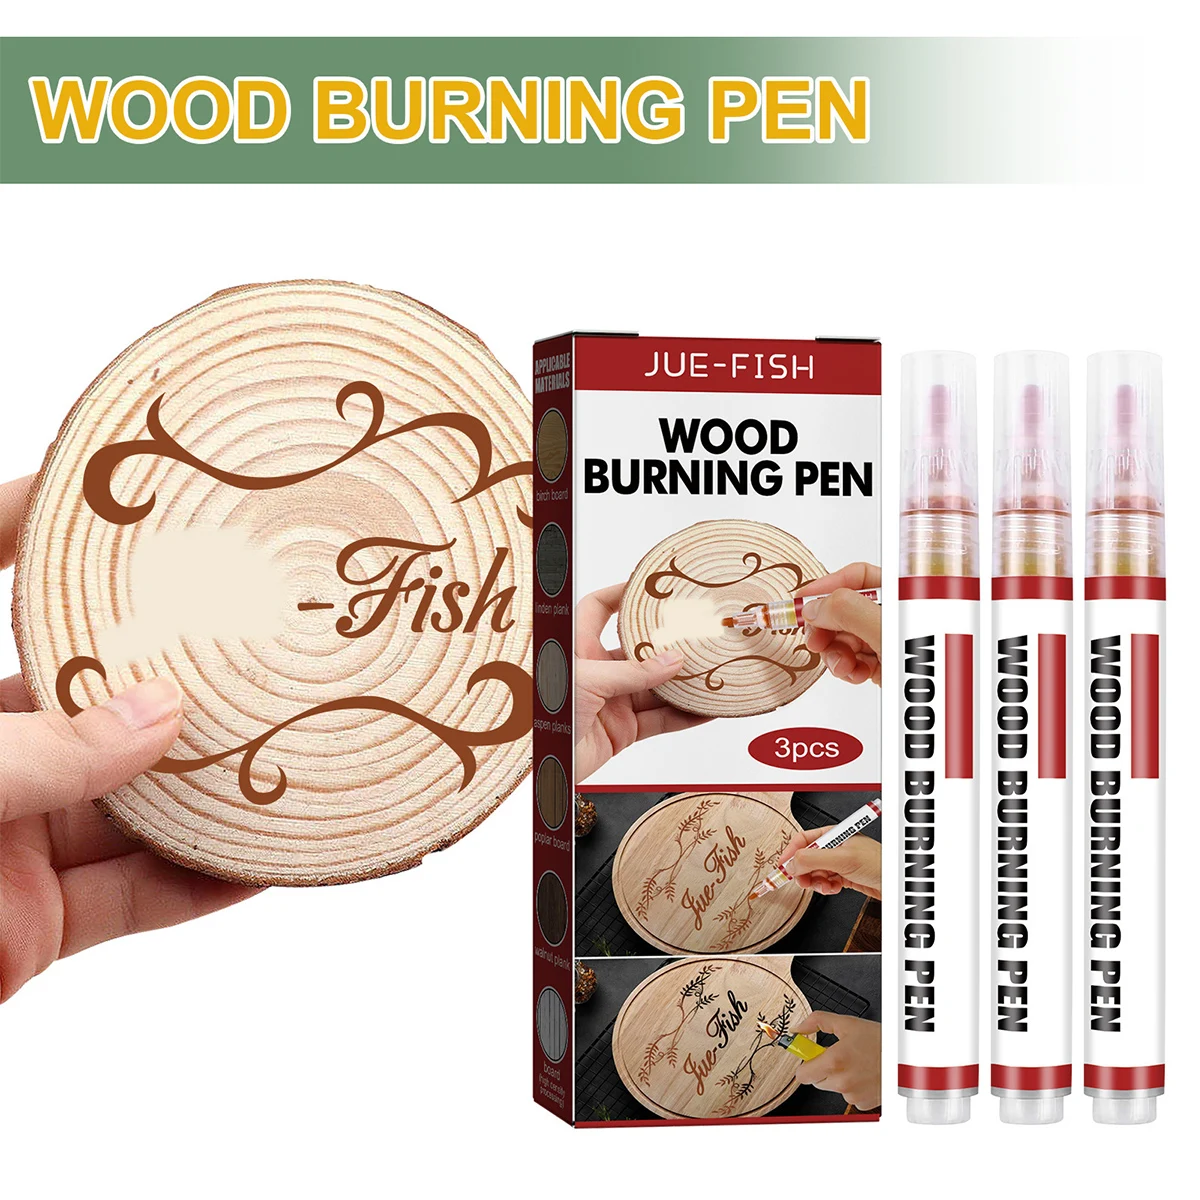 

3Pcs Wood Burning Pen Scorch Pen Chemical Wood Burning Pen For Project Painting DIY Pyrography Caramel Marker Hand Tools Set